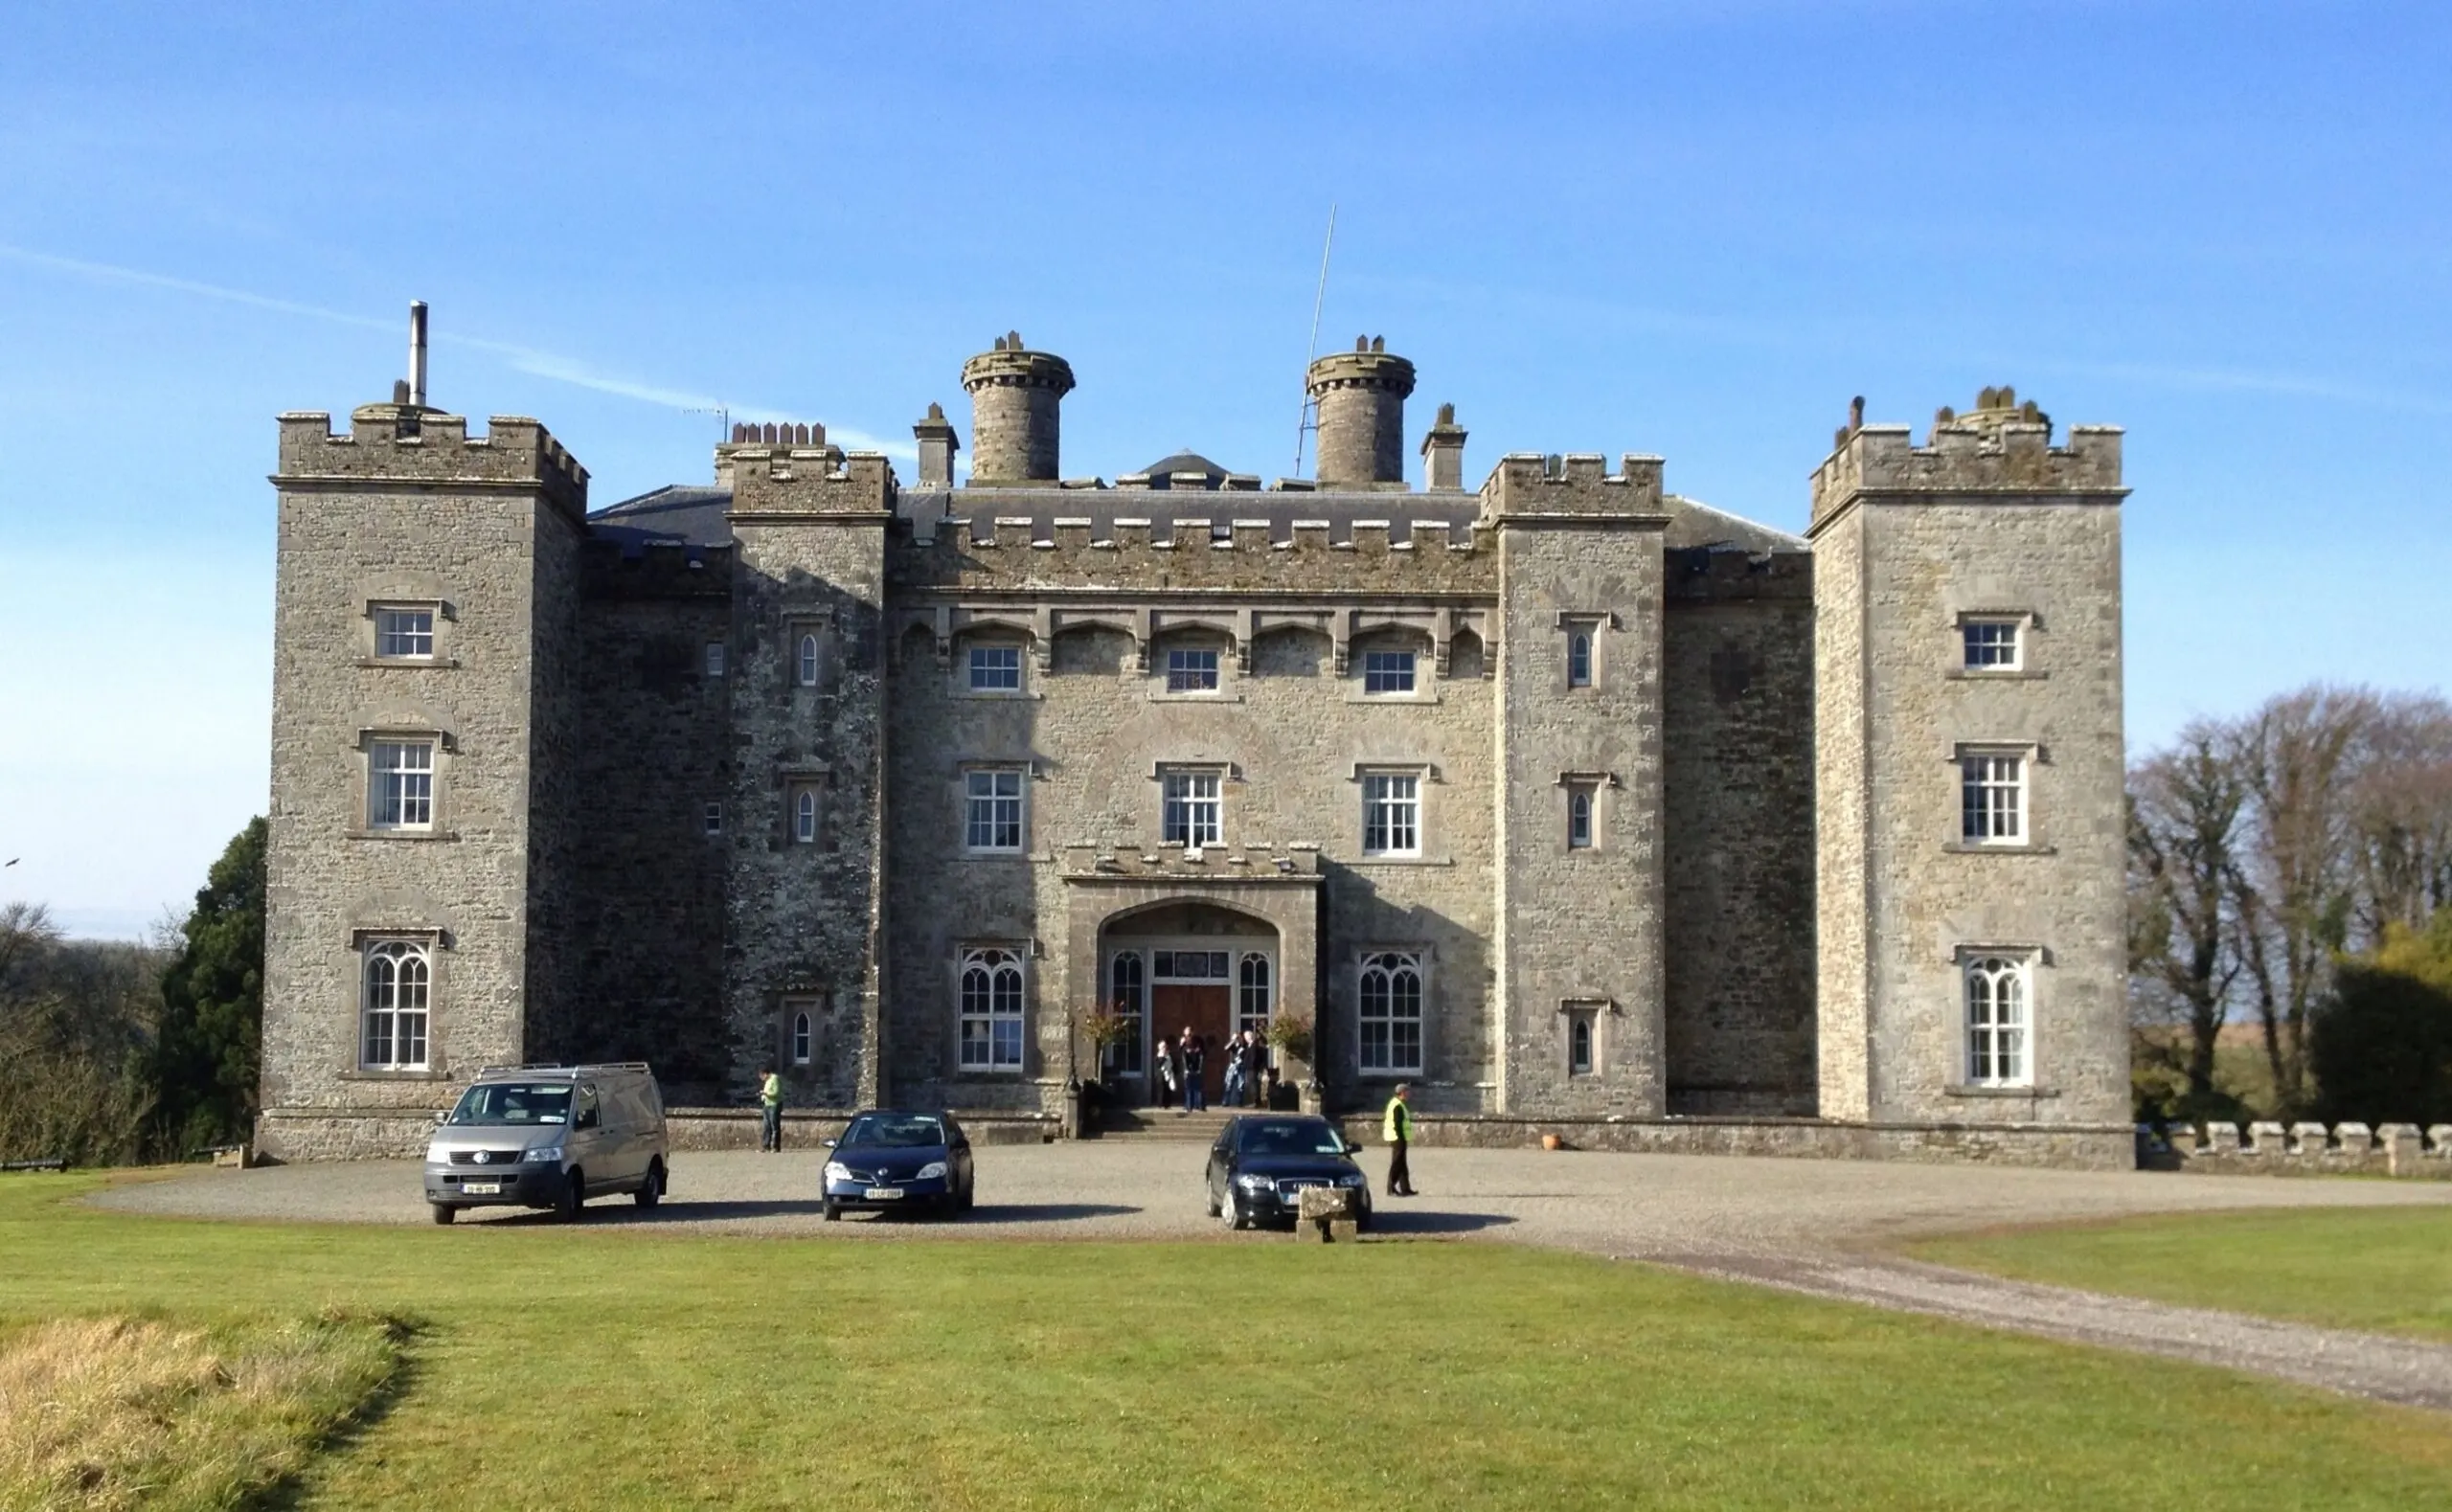 slane castle is a manor-style castle with tours and outdoor concerts.